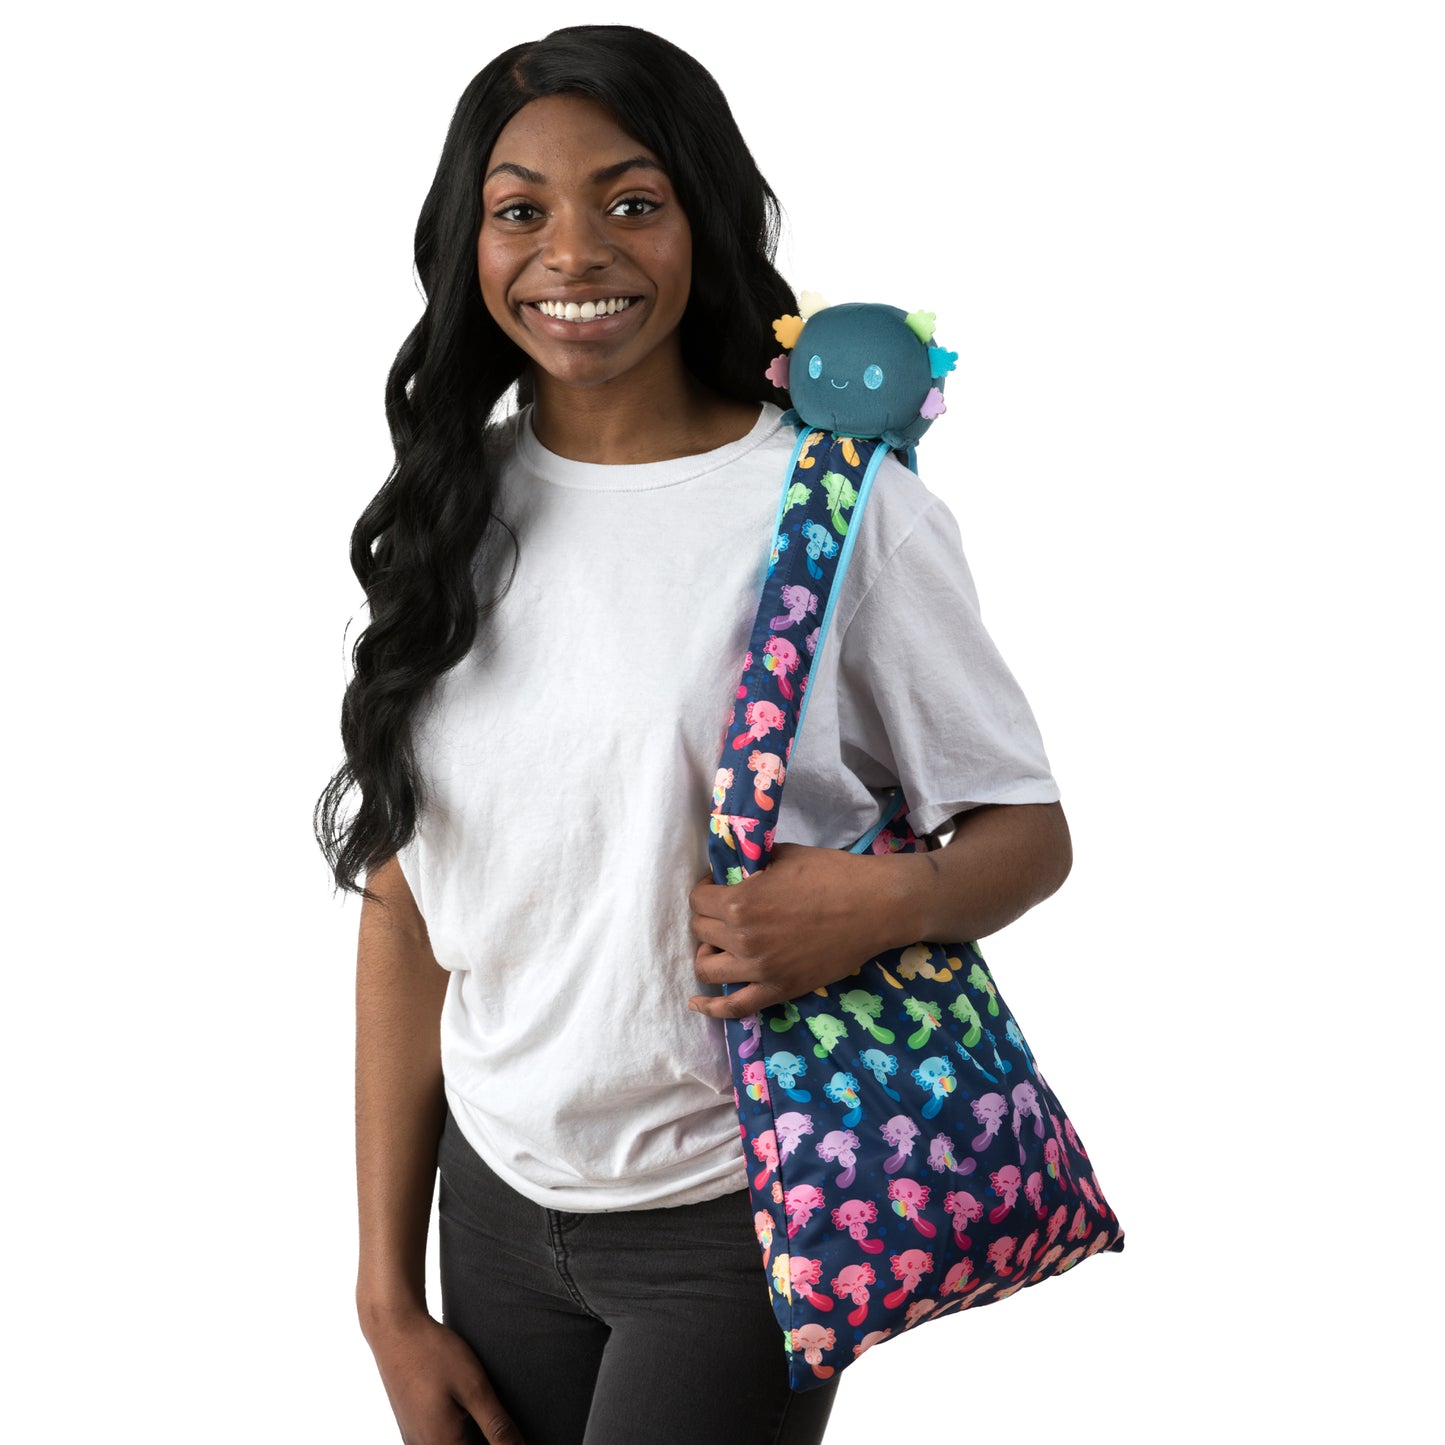 A woman holding a Plushiverse Rainbow Axolotl Plushie Tote Bag by TeeTurtle with a unicorn on it.